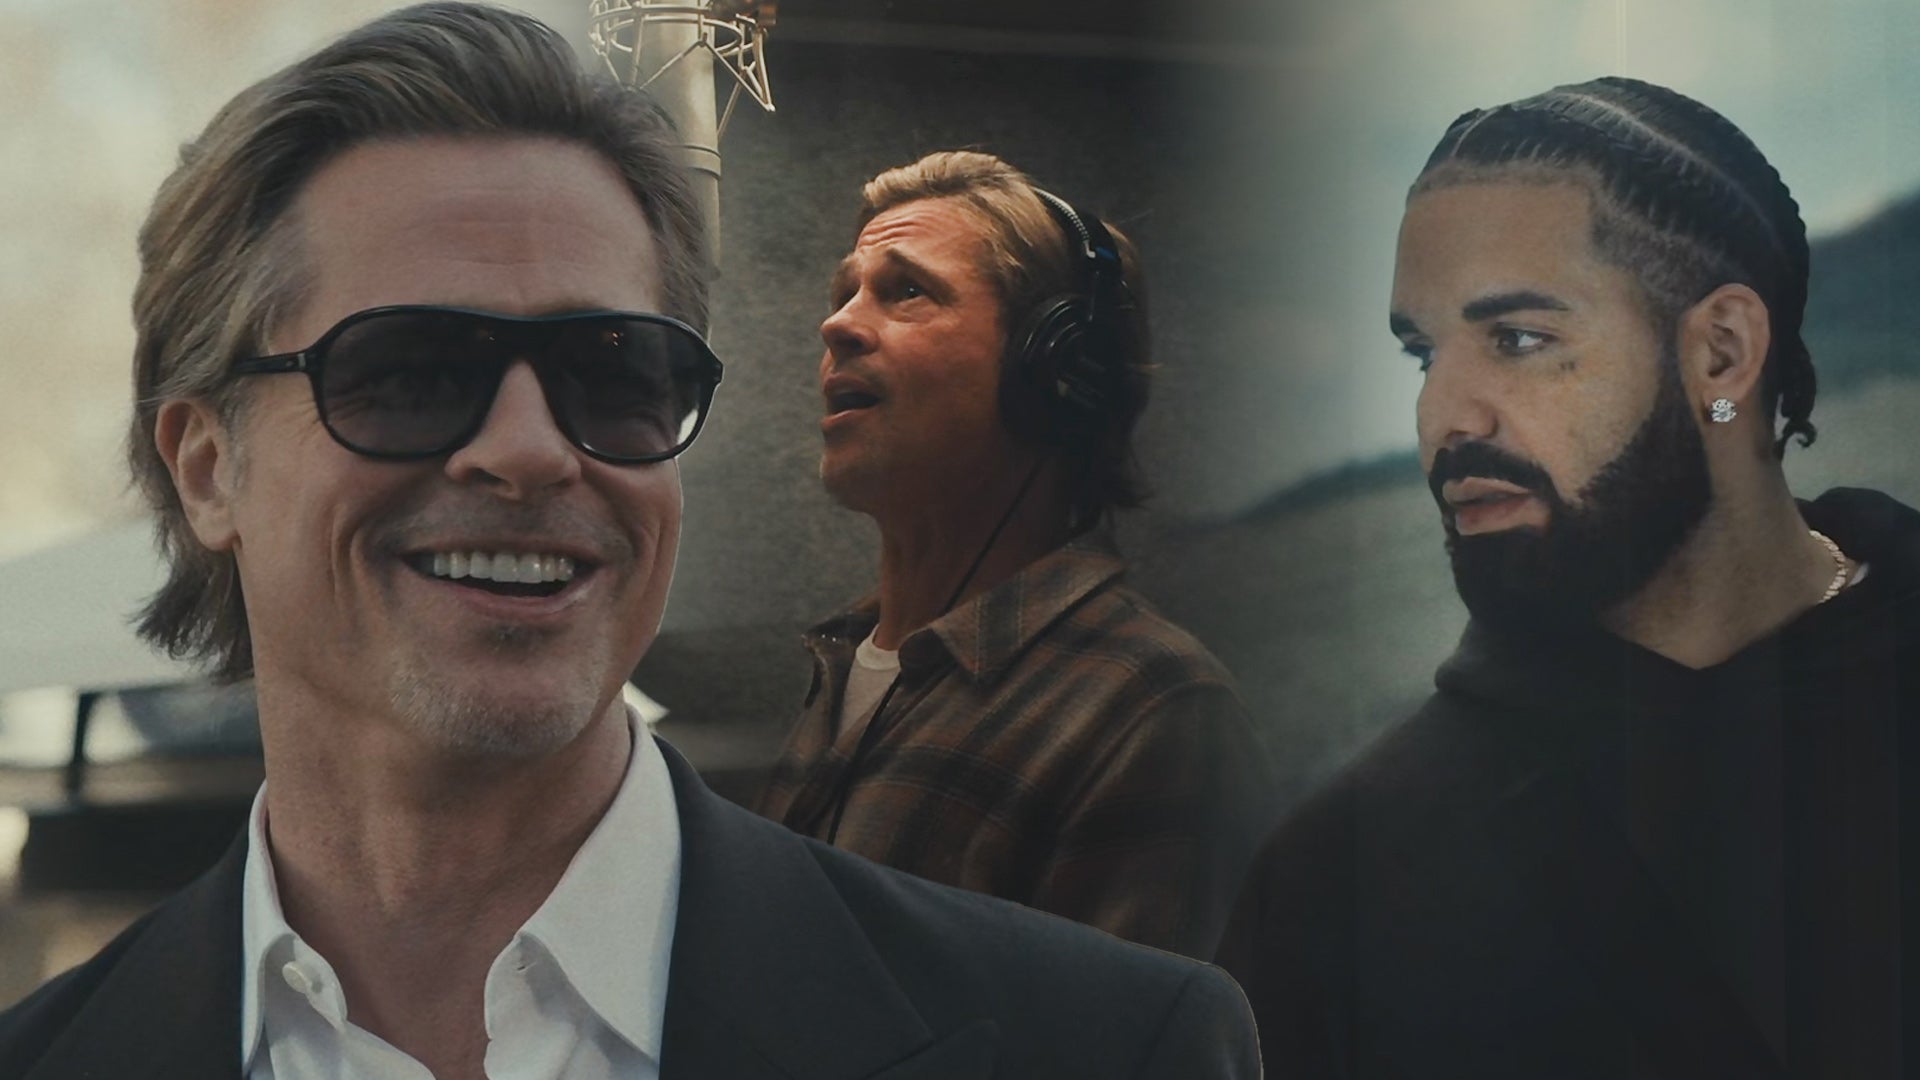 Brad Pitt and Drake Make UNEXPECTED Returns to TV on 'Dave' Season 3 Finale  